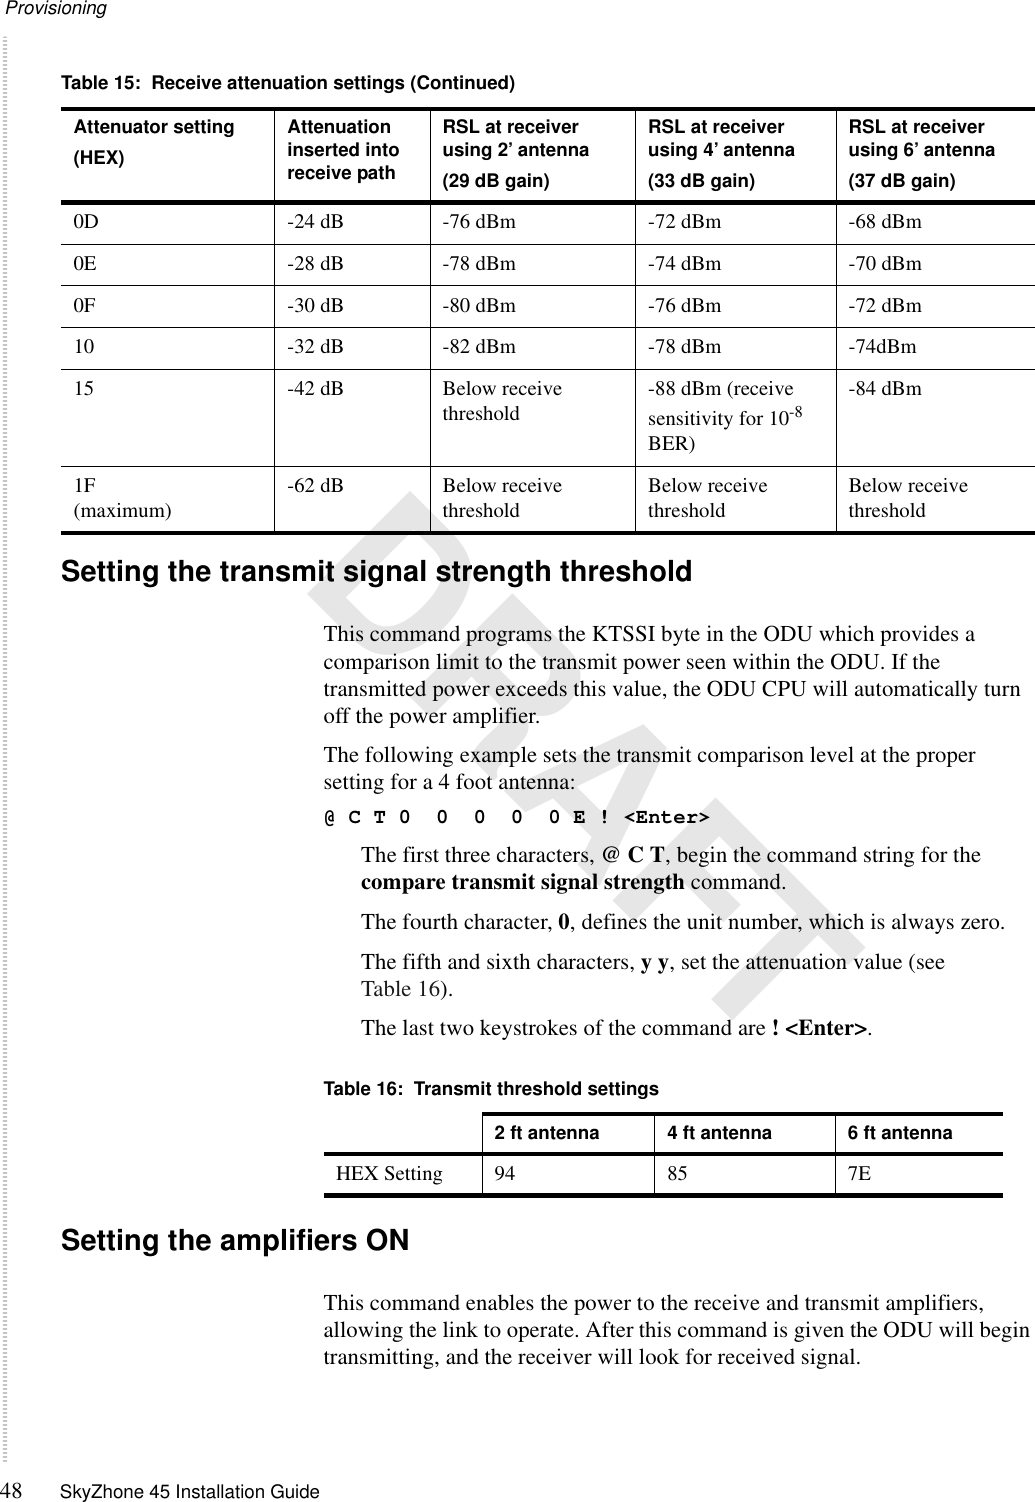 Provisioning48 SkyZhone 45 Installation Guide DRAFTSetting the transmit signal strength threshold This command programs the KTSSI byte in the ODU which provides a comparison limit to the transmit power seen within the ODU. If the transmitted power exceeds this value, the ODU CPU will automatically turn off the power amplifier.The following example sets the transmit comparison level at the proper setting for a 4 foot antenna:@ C T 0  0  0  0  0 E ! &lt;Enter&gt;The first three characters, @ C T, begin the command string for the compare transmit signal strength command.The fourth character, 0, defines the unit number, which is always zero.The fifth and sixth characters, y y, set the attenuation value (see Table 16).The last two keystrokes of the command are ! &lt;Enter&gt;.Setting the amplifiers ONThis command enables the power to the receive and transmit amplifiers, allowing the link to operate. After this command is given the ODU will begin transmitting, and the receiver will look for received signal. 0D -24 dB -76 dBm -72 dBm -68 dBm0E -28 dB -78 dBm -74 dBm -70 dBm0F -30 dB -80 dBm -76 dBm -72 dBm10 -32 dB -82 dBm -78 dBm -74dBm15 -42 dB Below receive threshold -88 dBm (receive sensitivity for 10-8 BER)-84 dBm1F(maximum) -62 dB Below receive threshold Below receive threshold Below receive thresholdTable 15:  Receive attenuation settings (Continued)Attenuator setting(HEX)Attenuation inserted into receive path RSL at receiver using 2’ antenna(29 dB gain)RSL at receiver using 4’ antenna(33 dB gain)RSL at receiver using 6’ antenna(37 dB gain)Table 16:  Transmit threshold settings2 ft antenna 4 ft antenna 6 ft antennaHEX Setting 94 85 7E